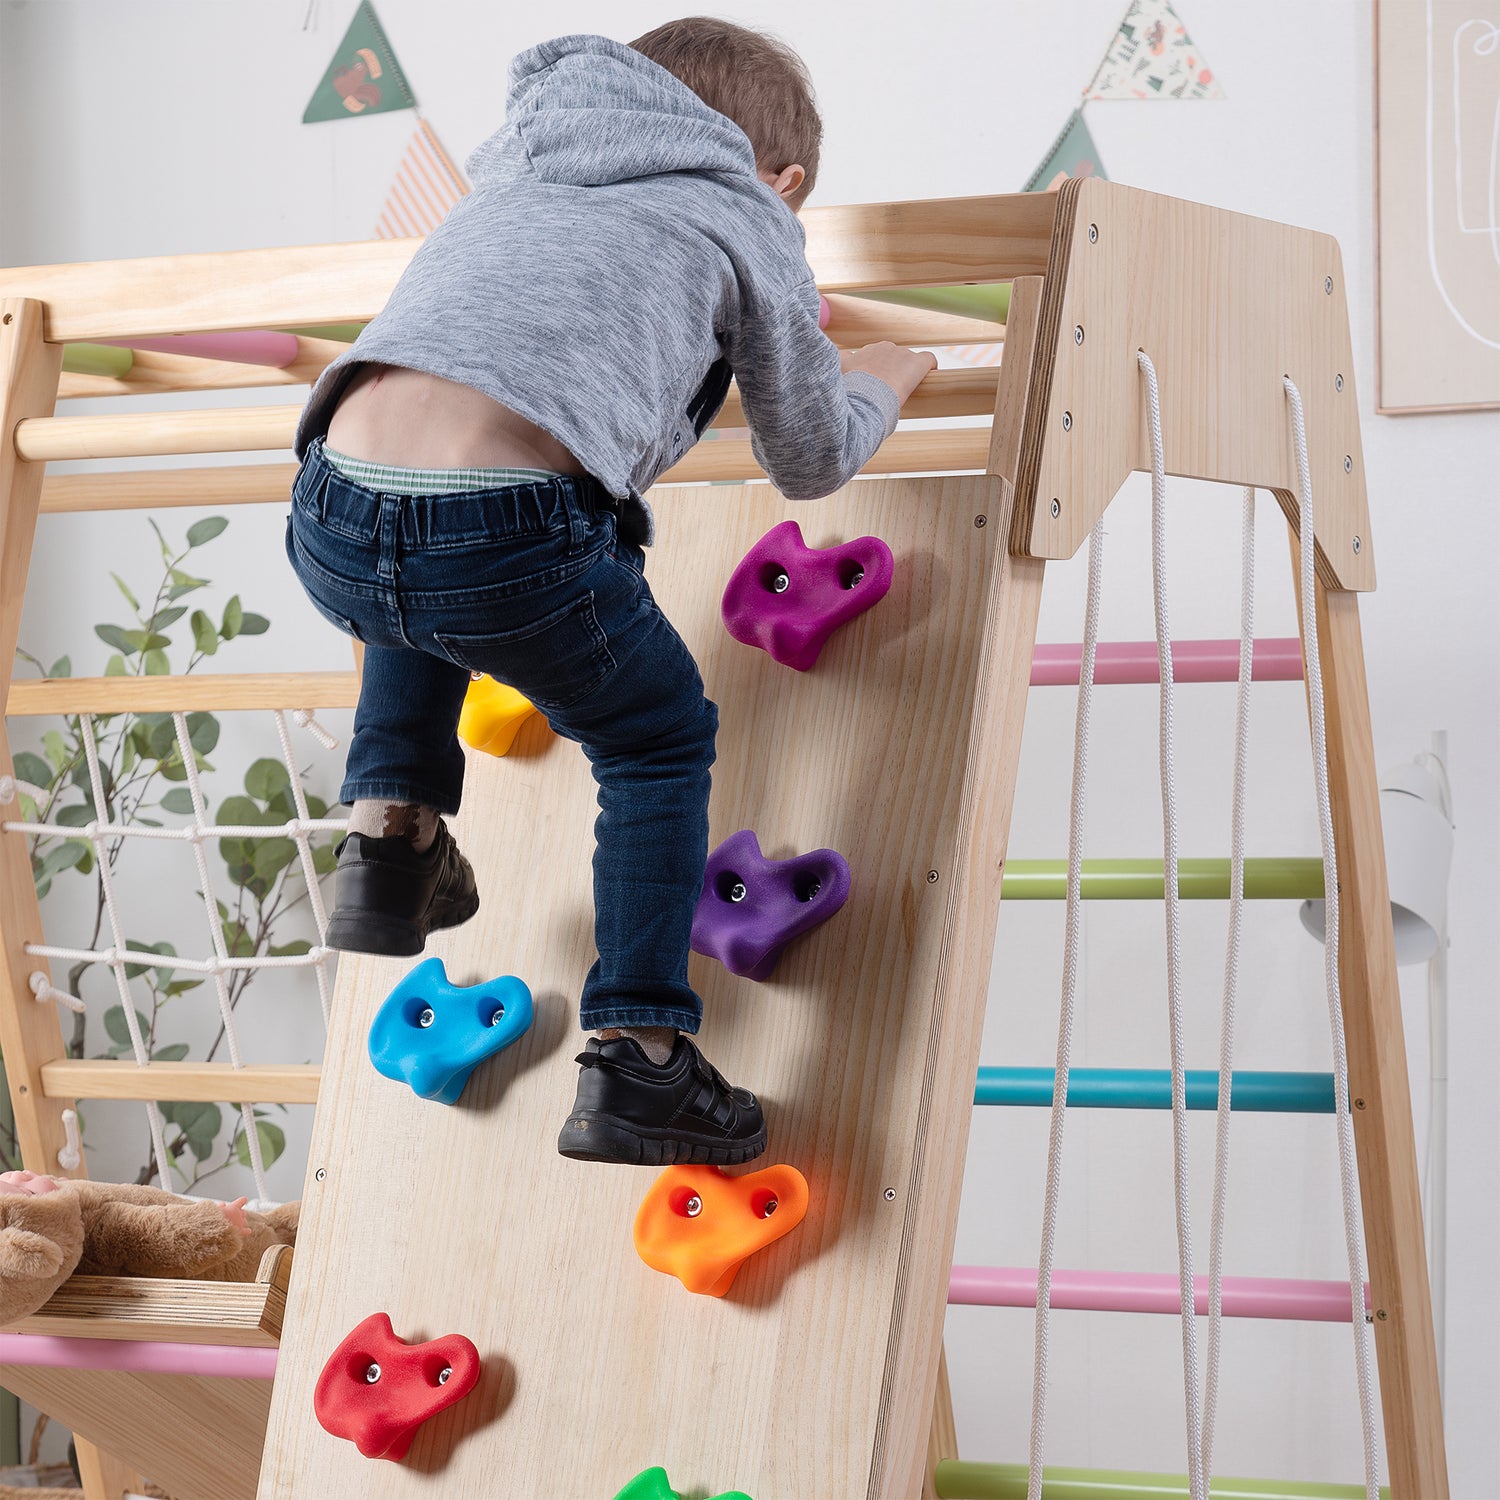 Child Climbing on Avenlur's Magnolia Real Wood Playset's Rock Wall